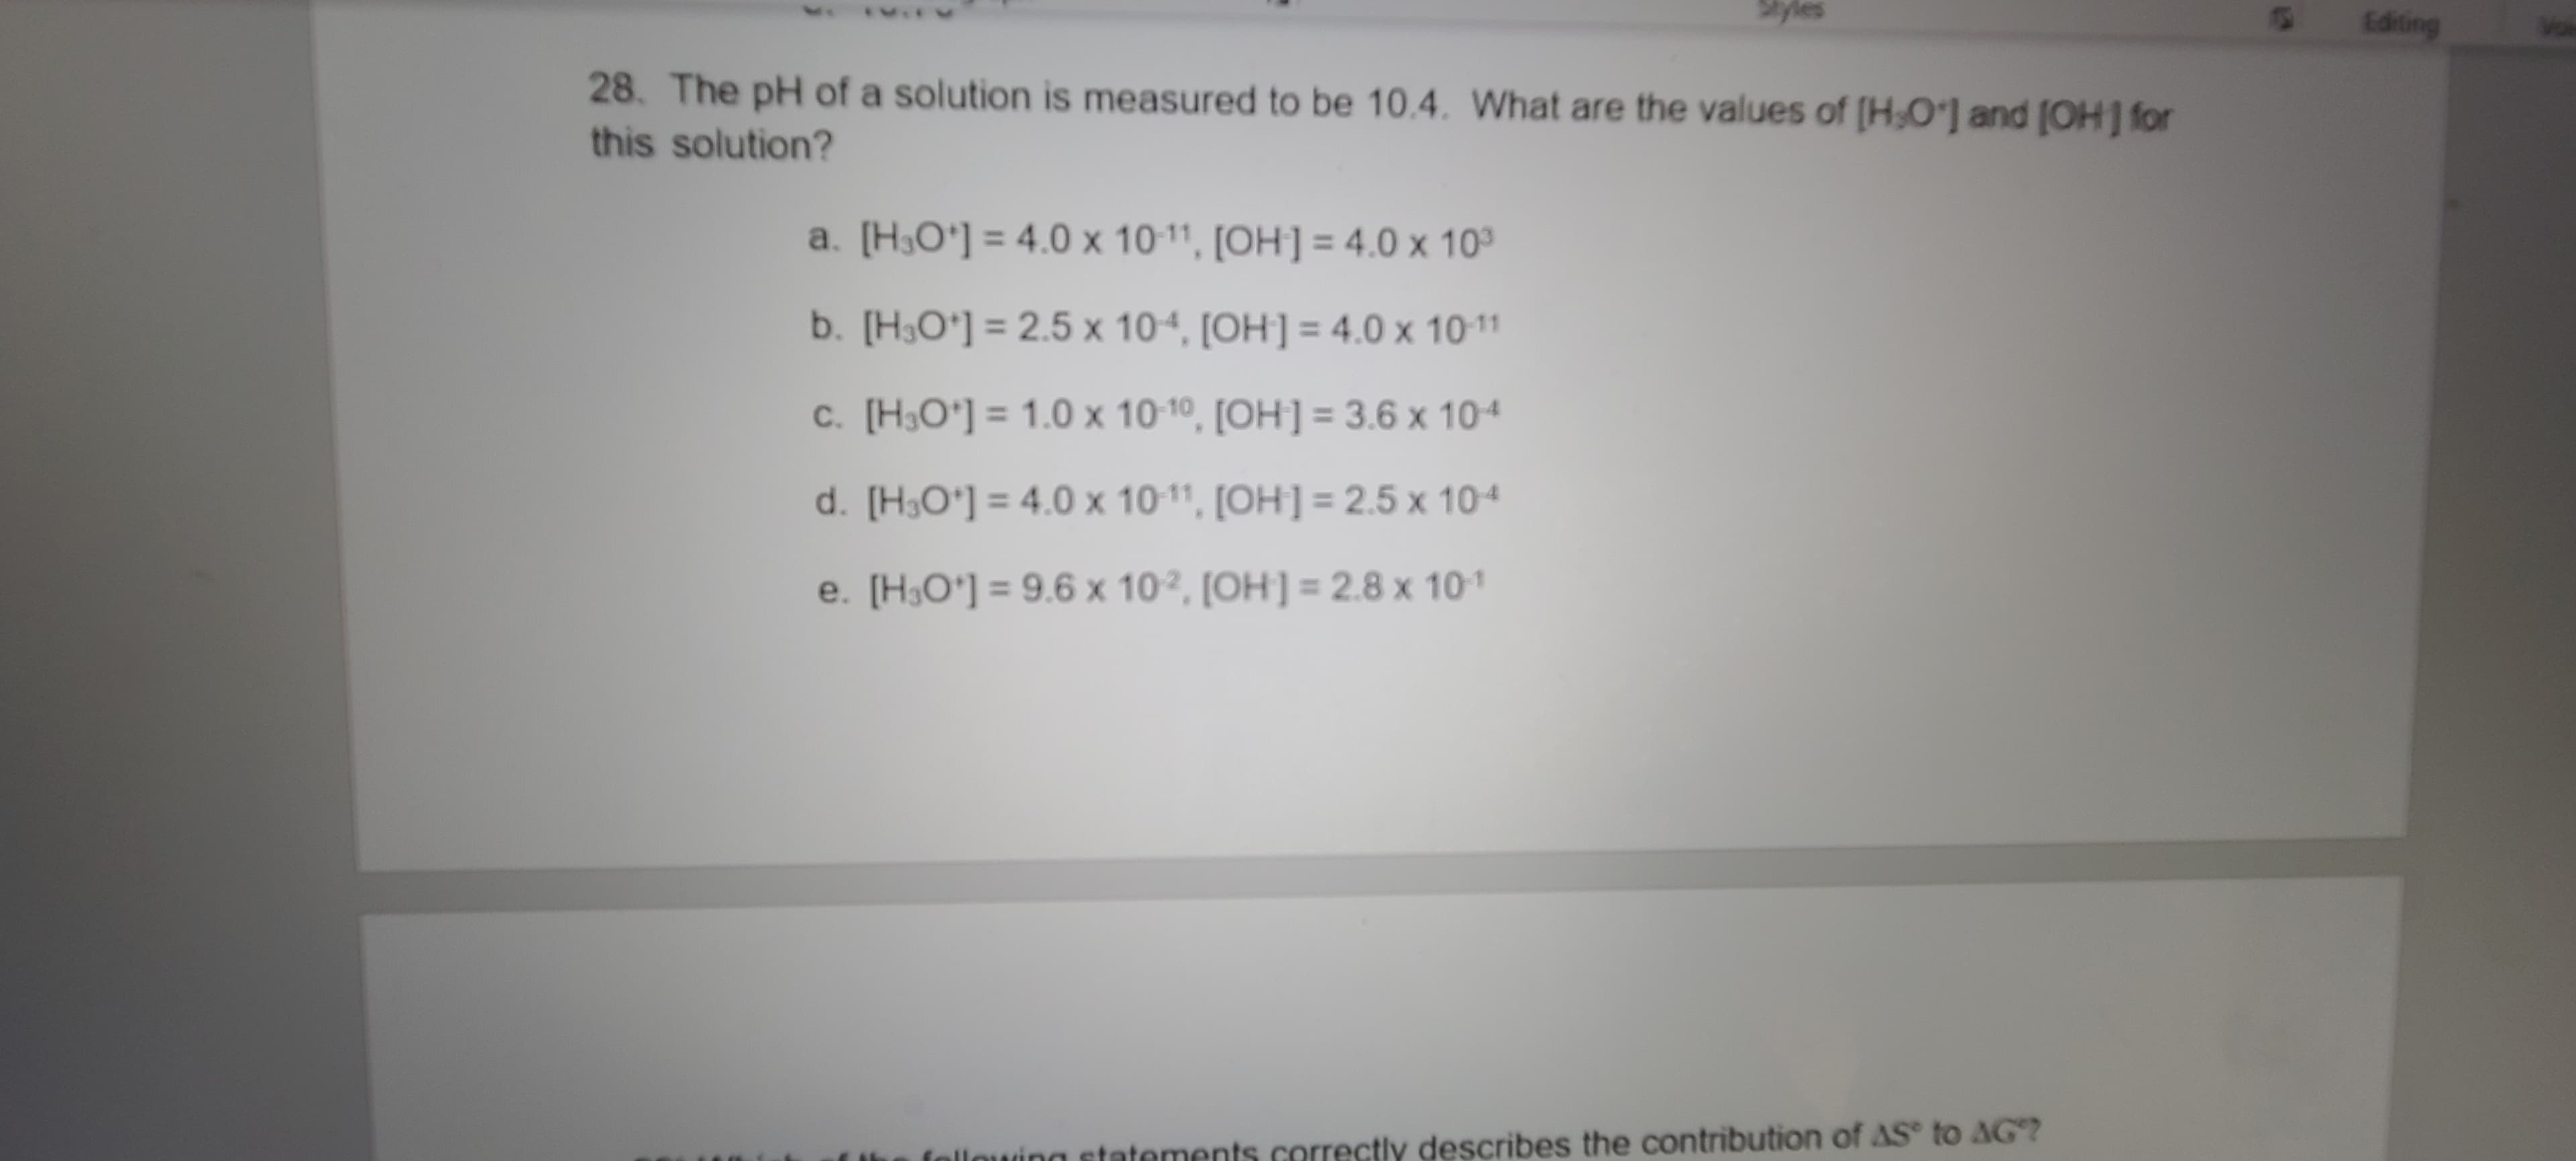 28. The pH of a solution is measured to be 10.4. What are the values of (H0'] and (OH] for
this solution?
a. [H,O'] = 4.0 x 10-11, [OH] = 4.0 x 10
b. [H,O'] = 2.5 x 104, [OH] = 4.0 x 10-11
c. [H,O'] = 1.0 x 1010, [OH] = 3.6 x 104
d. [H,O'] = 4.0 x 101, [OH] = 2.5 x 104
e. [H,O'] = 9.6 x 102, [OH] = 2.8 x 101
